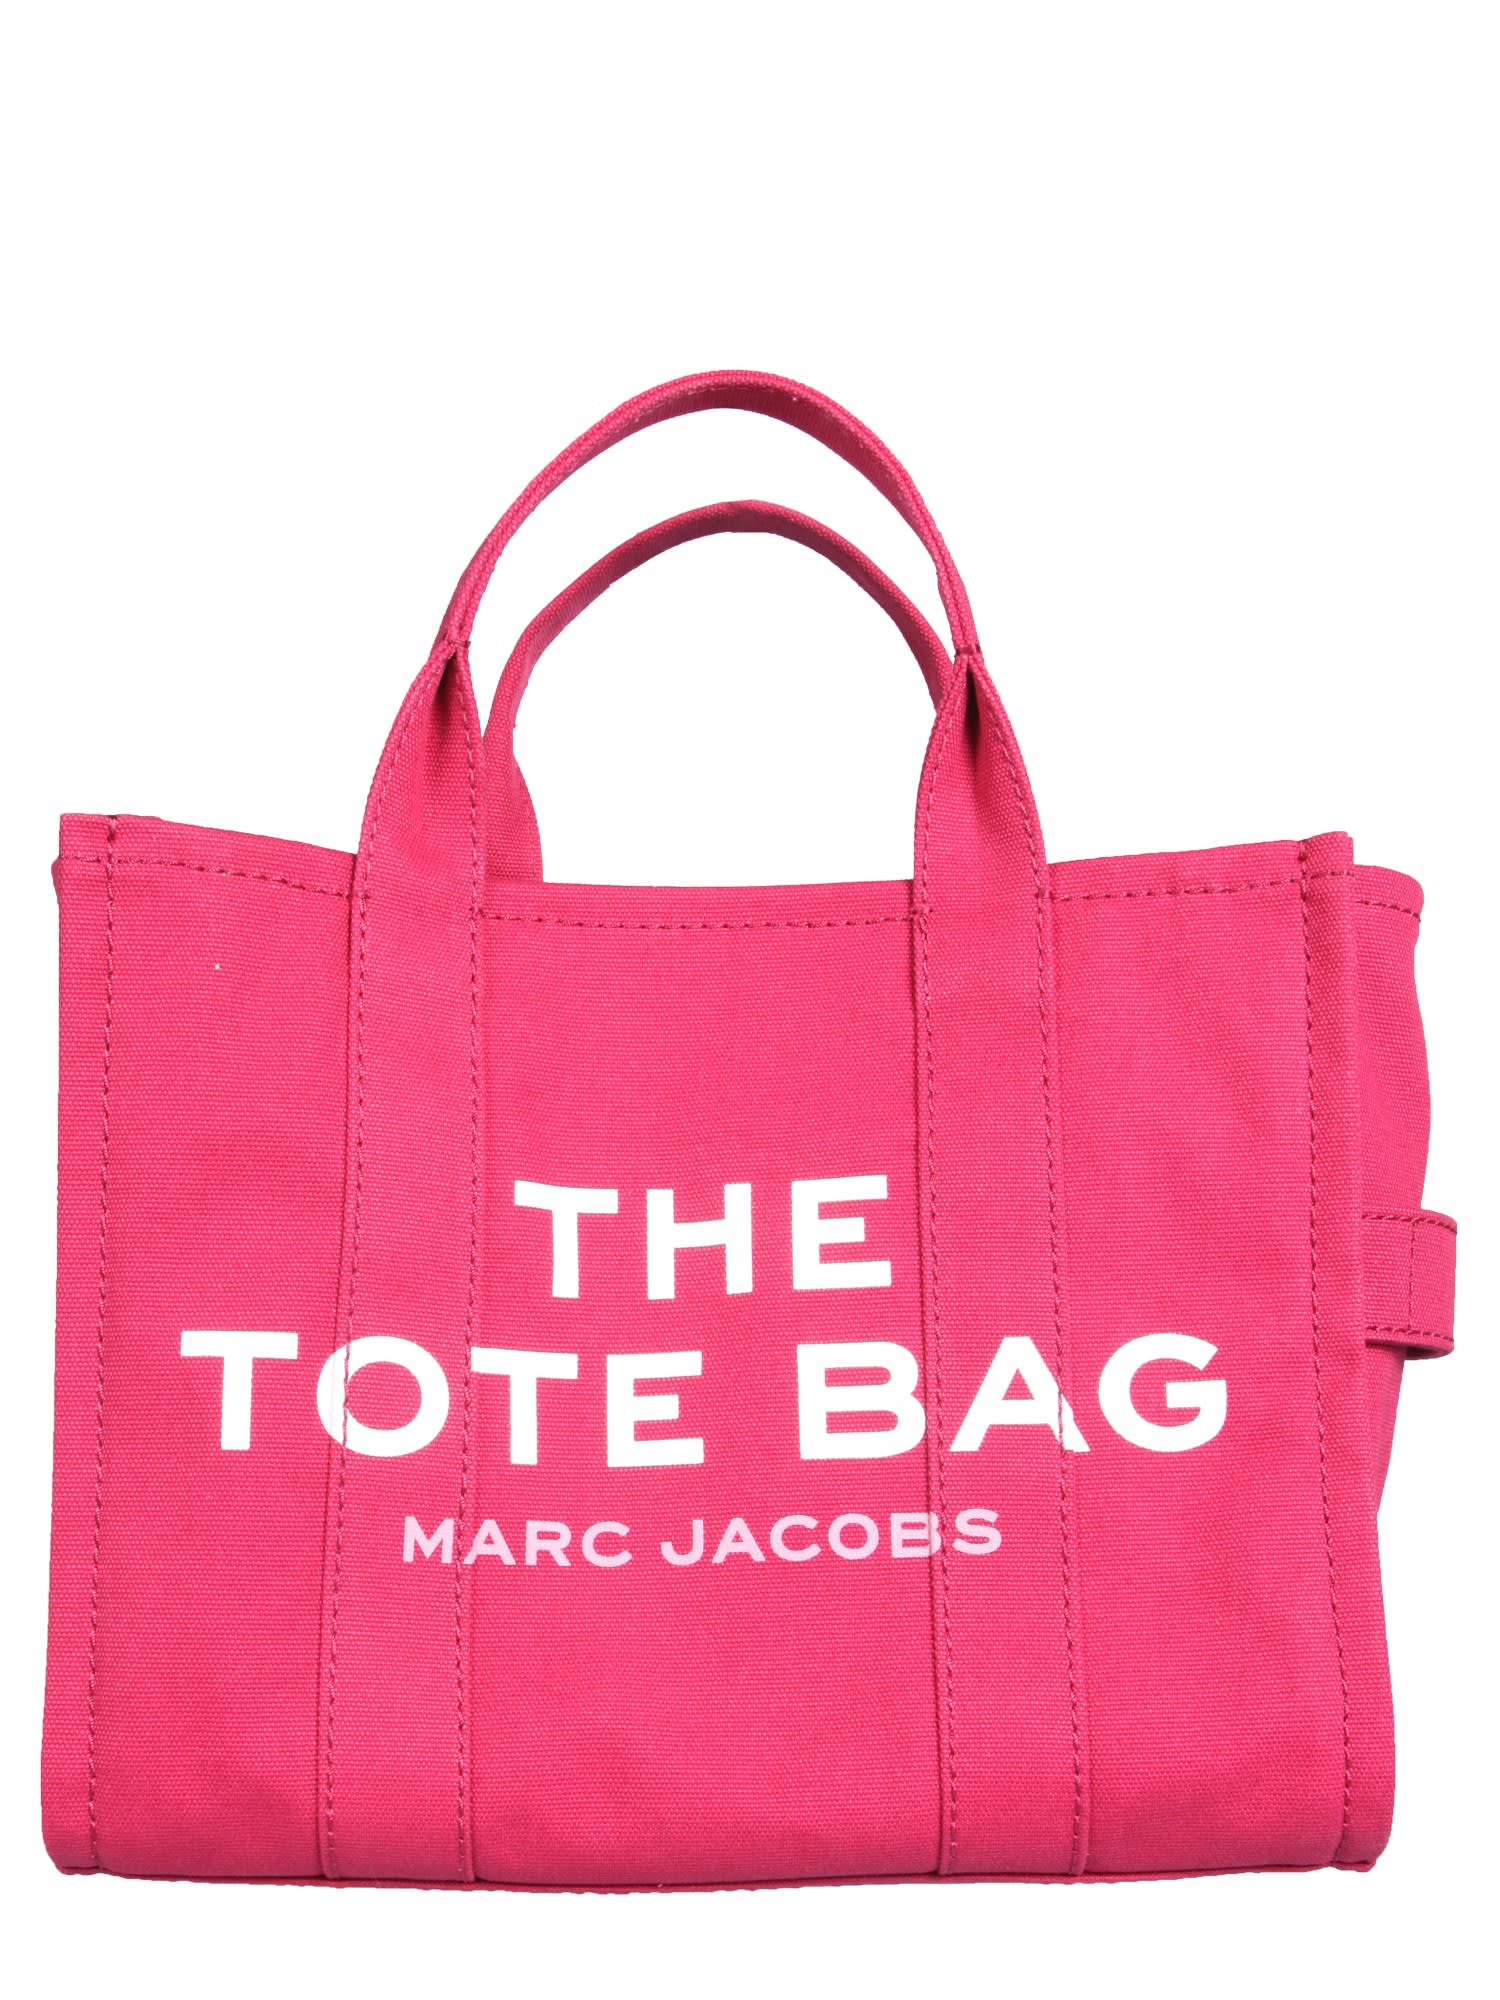 MARC JACOBS SMALL THE TRAVELER TOTE BAG,M0016161 601